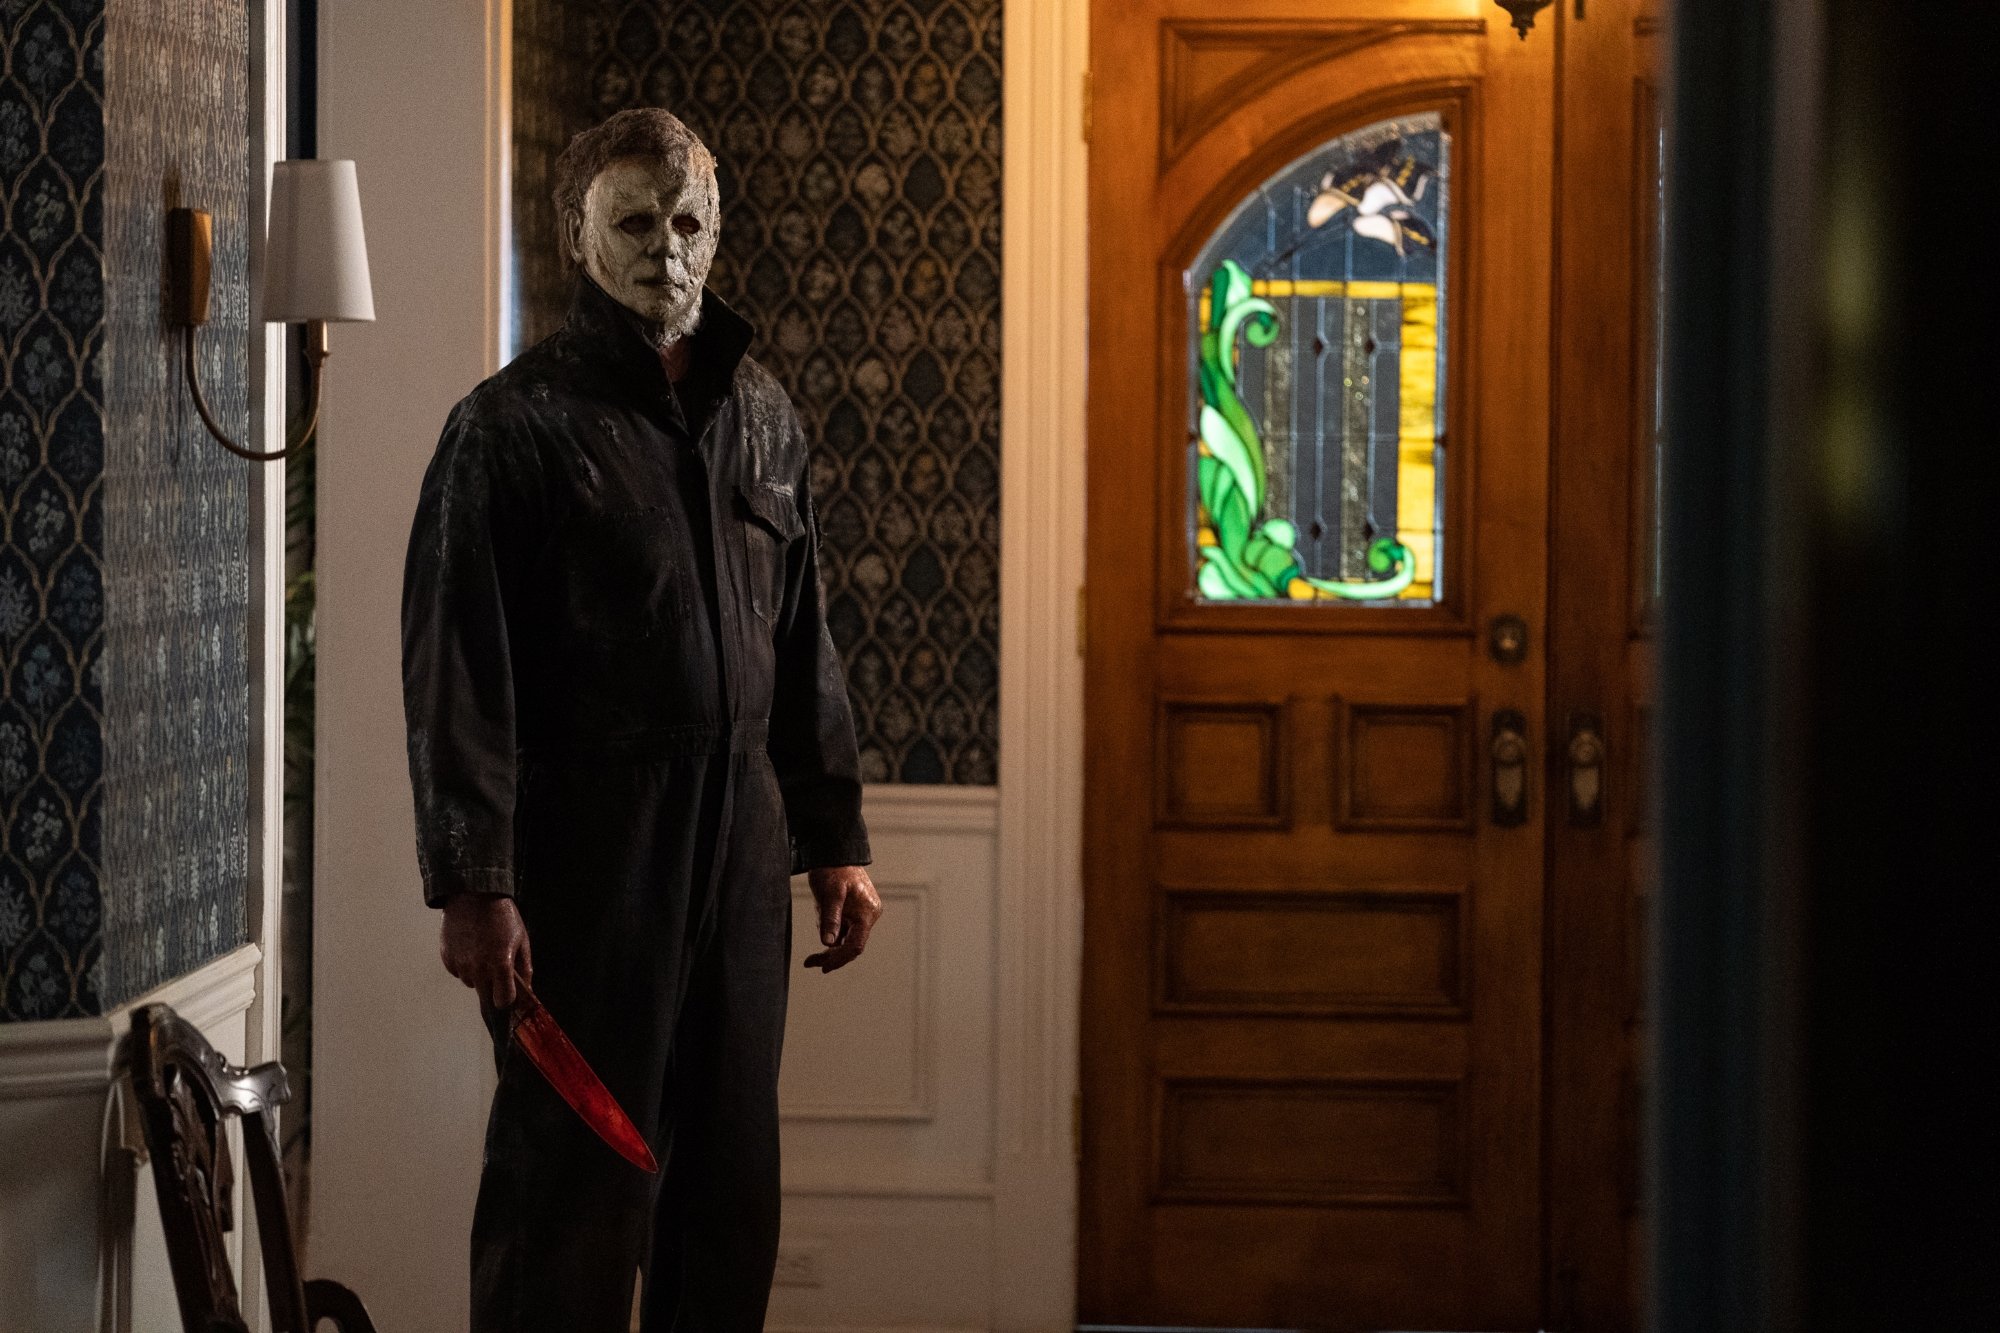 'Halloween Ends' James Jude Courtney as The Shape/Michael Myers standing in an entryway wearing his mask, holding a bloodied knife.